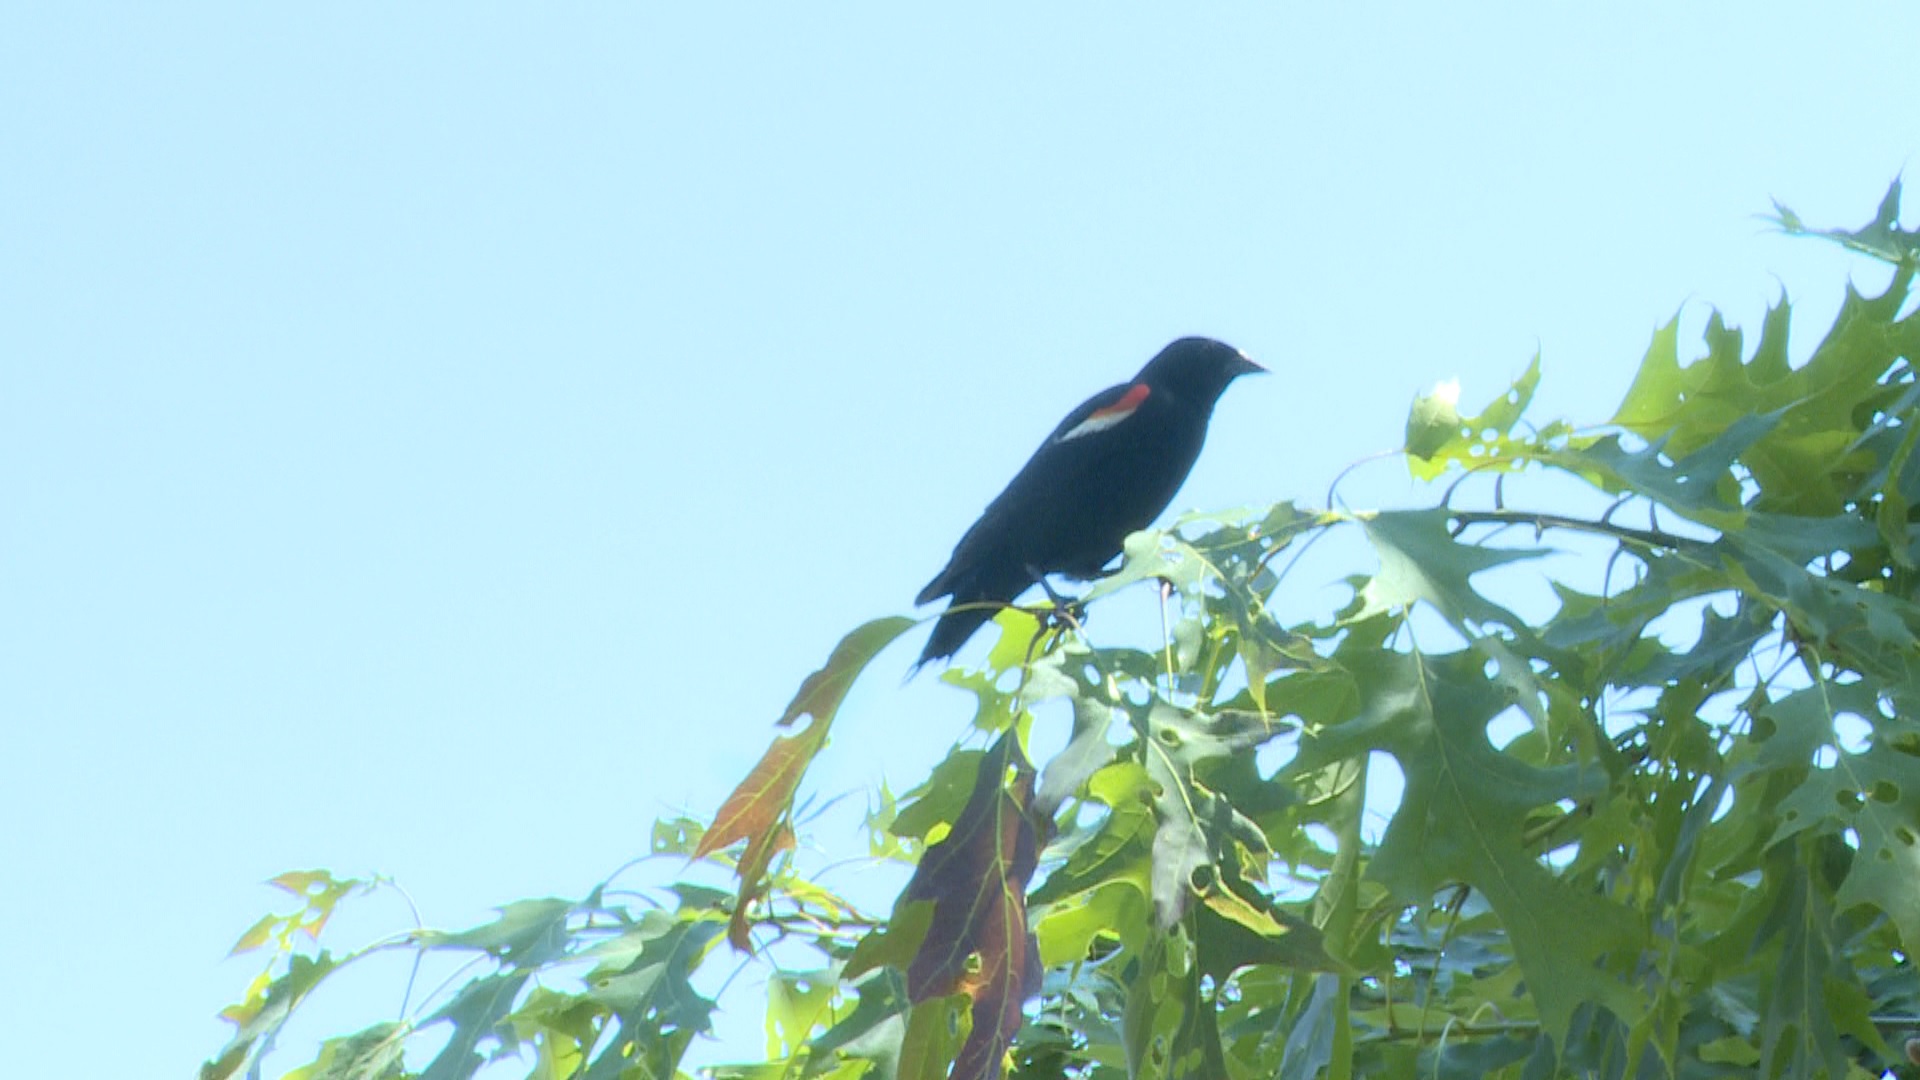 How to handle Toronto’s notorious dive bomber, the red-winged blackbird